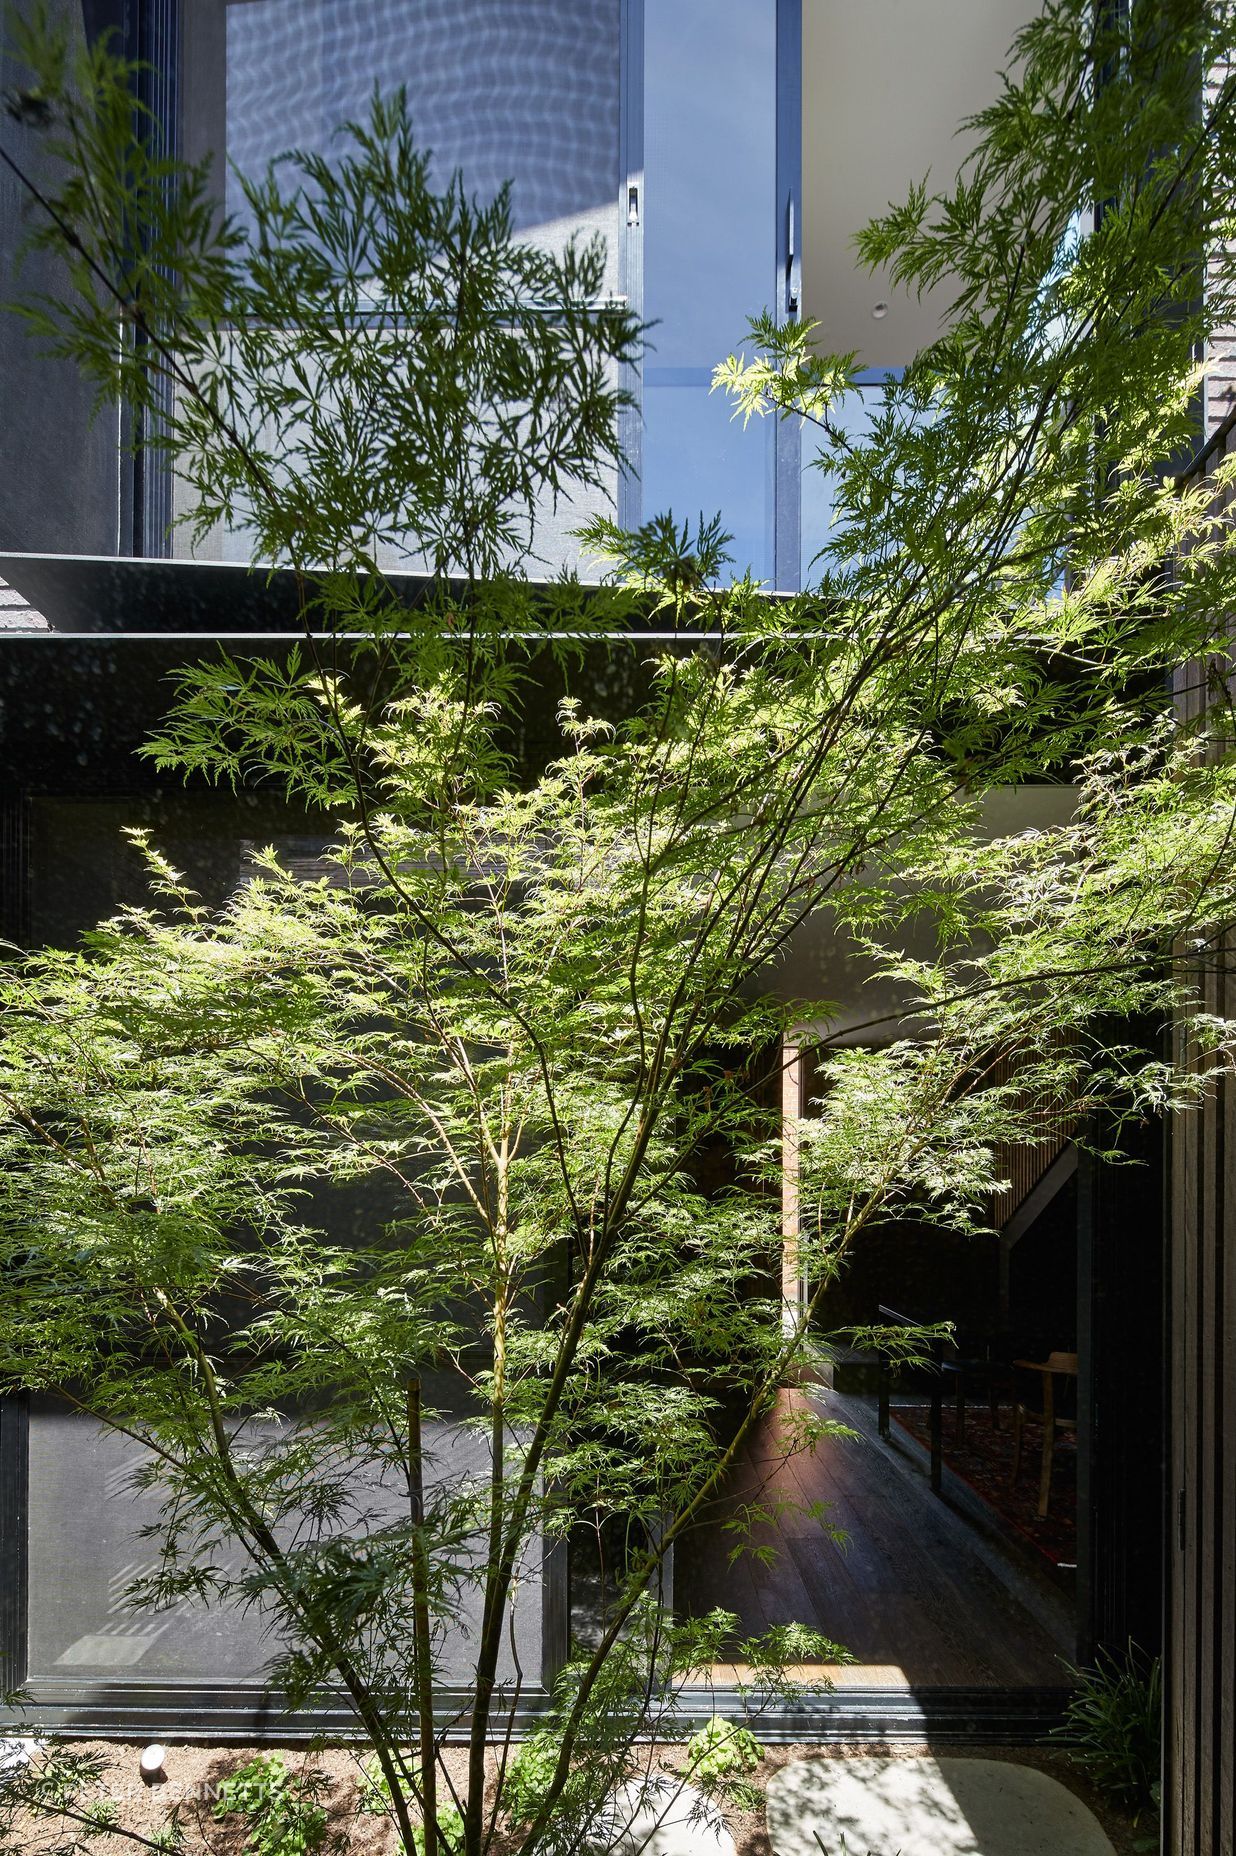 A leafy sanctuary unfolds before the new addition in the form of a light-filled courtyard.